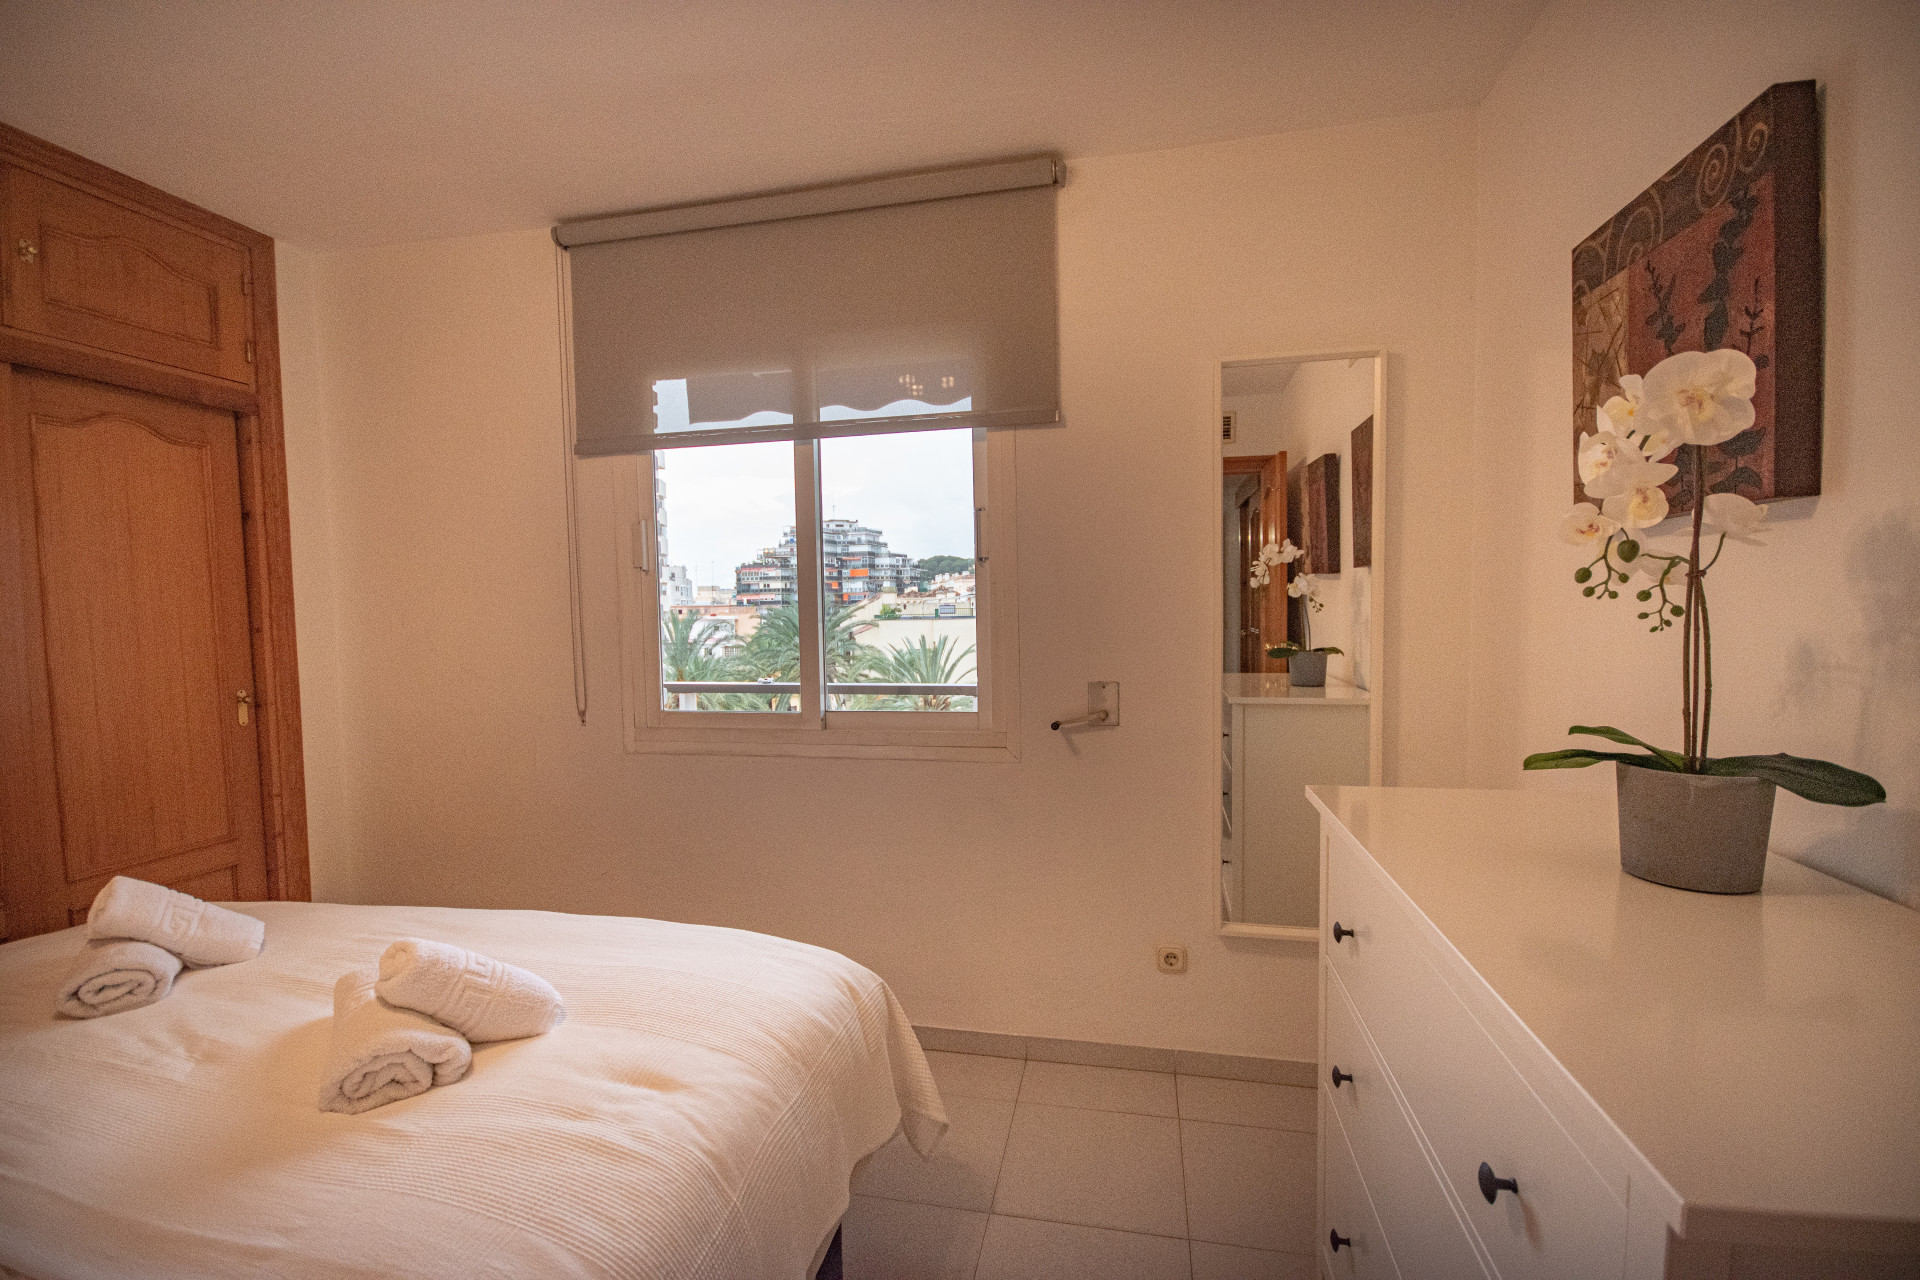 Newly renovated 3 bedroom apartment in the Center of Marbella